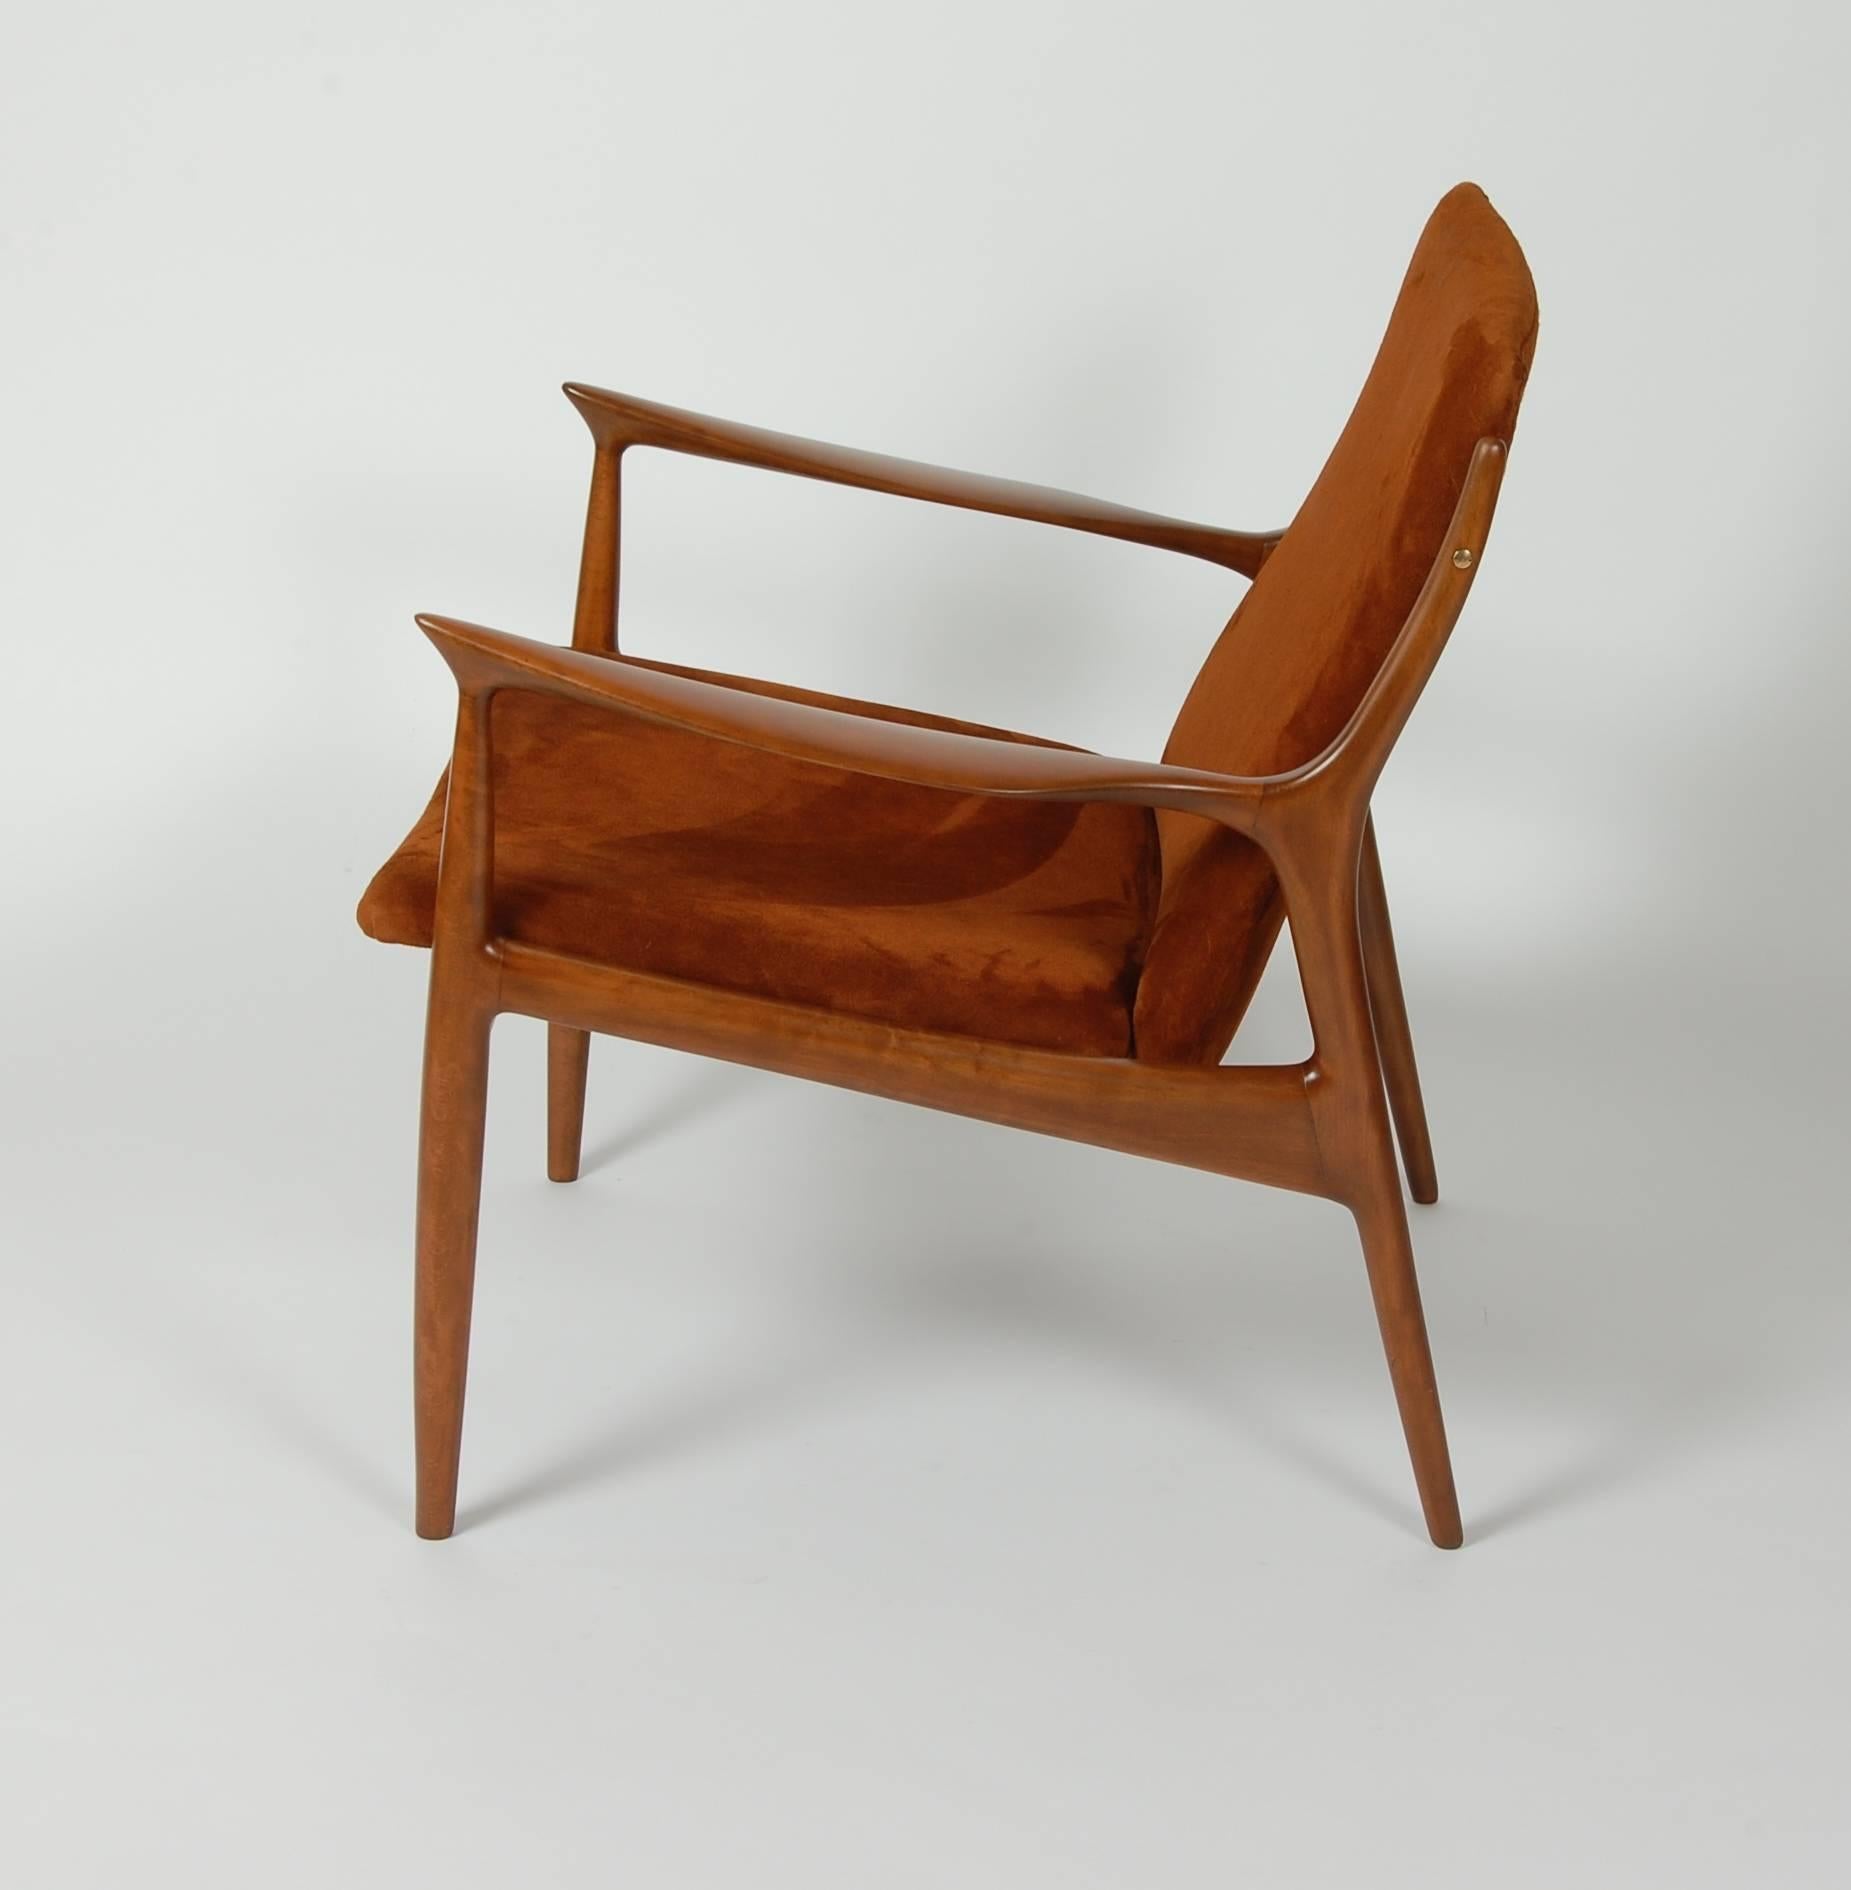 Sculptural armchair by Ib Kofod-Larsen for Selig of Denmark. Newly refinished and upholstered in a rust colored suede. The angled arms start with a severe point and end in a organic taper. Bass accent fasteners for the backrest add a nice visual